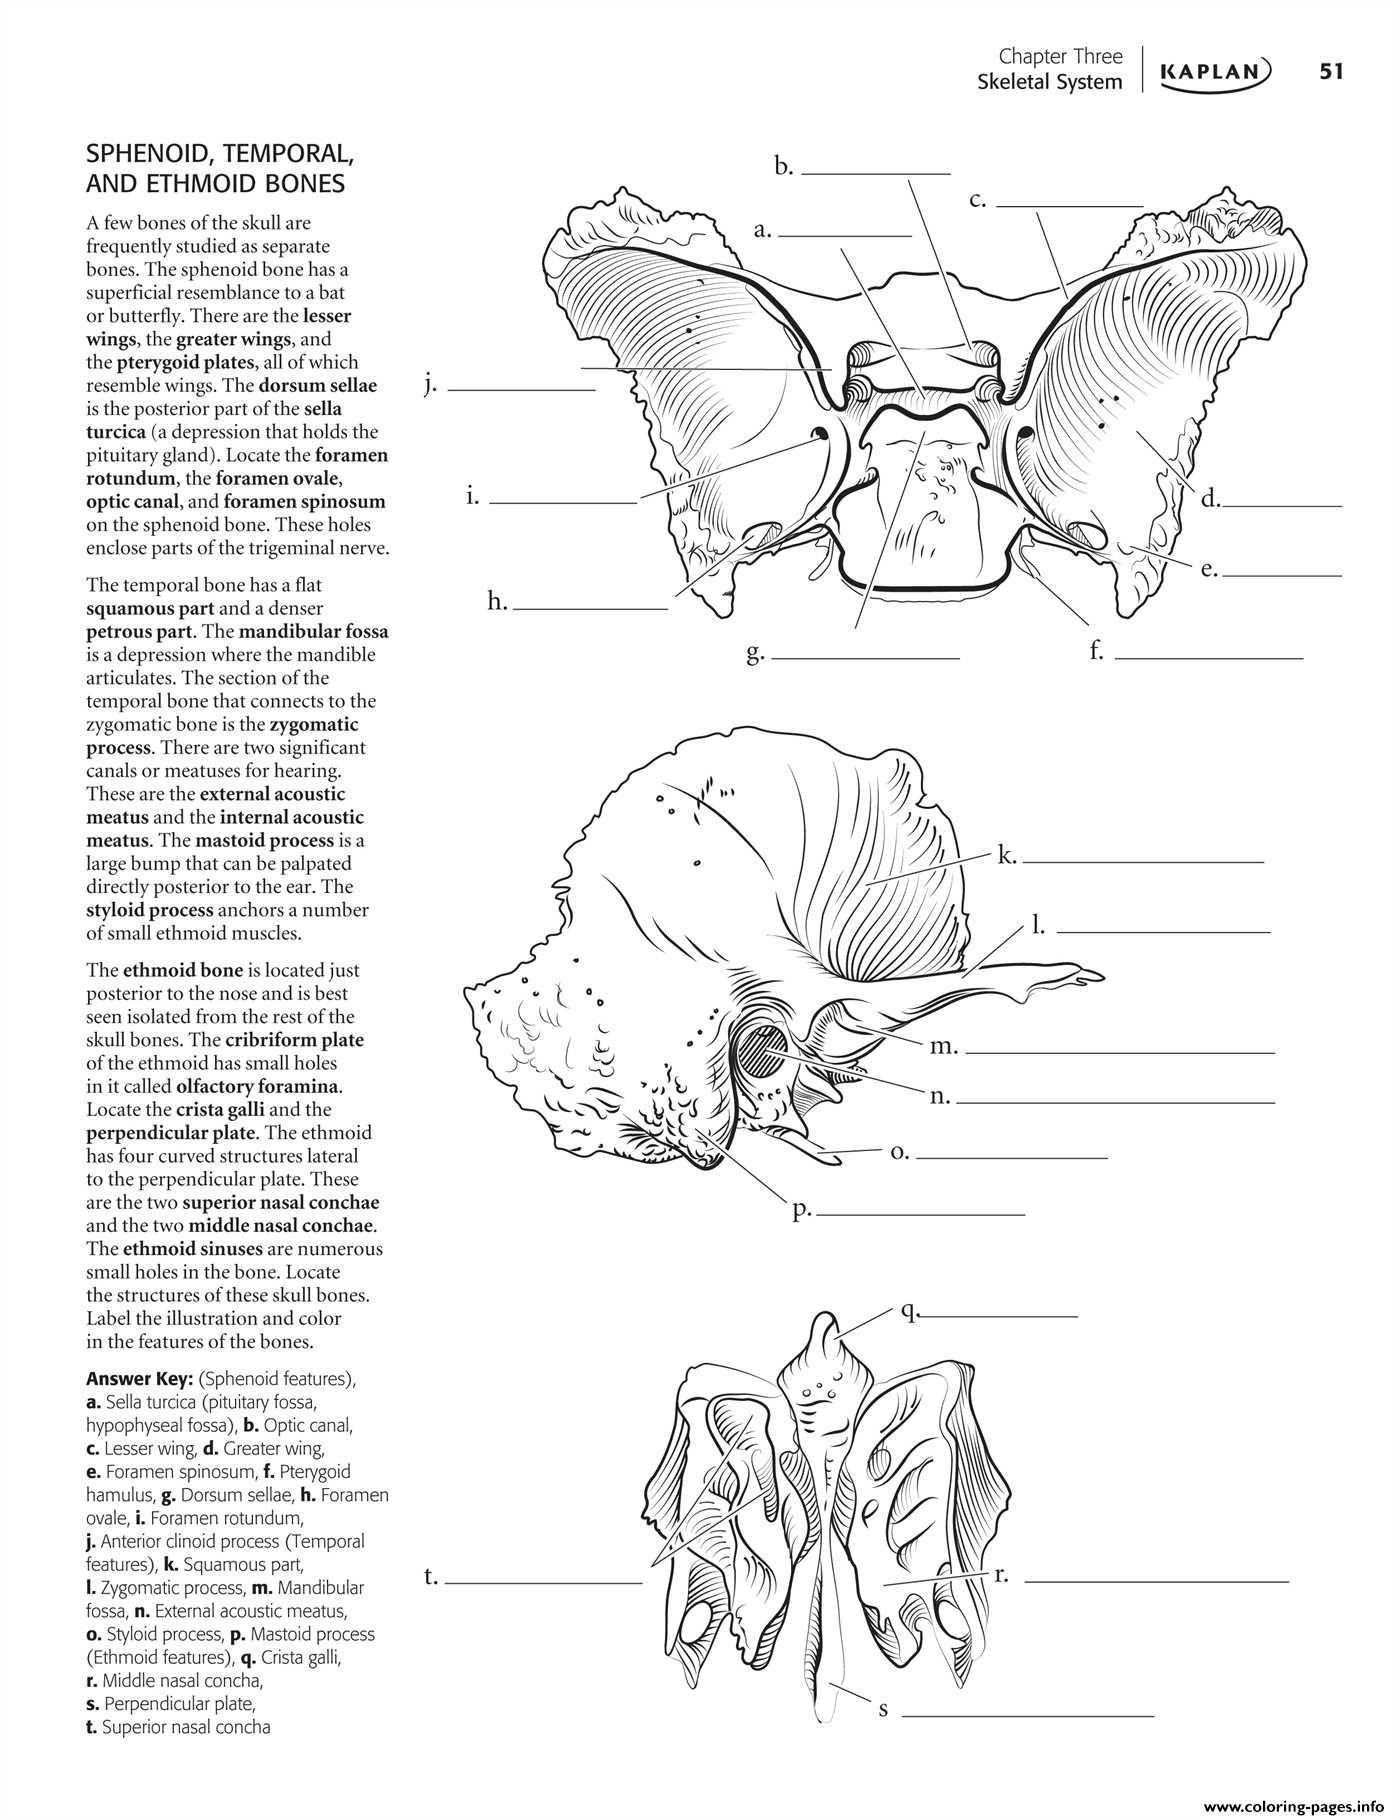 Human Anatomy Sphenoid Temporal And Ethmoid Bones coloring